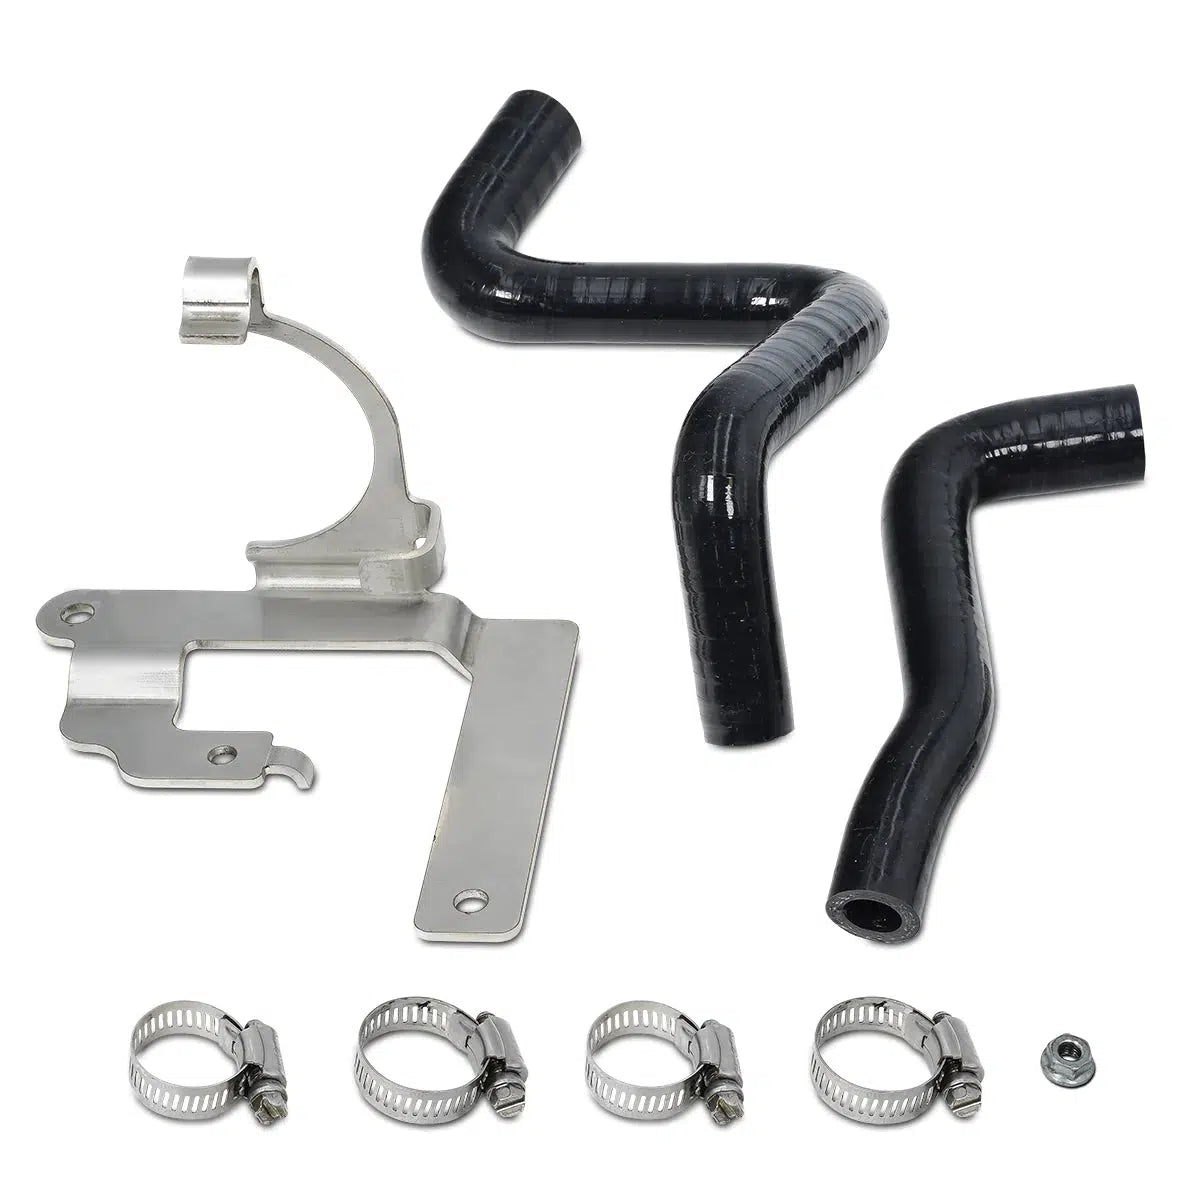 2020-2022 Duramax Fuel Coolant Pump Relocation Kit (114002700)-Coolant Tube Relocation Kit-PPE-114002700-Dirty Diesel Customs